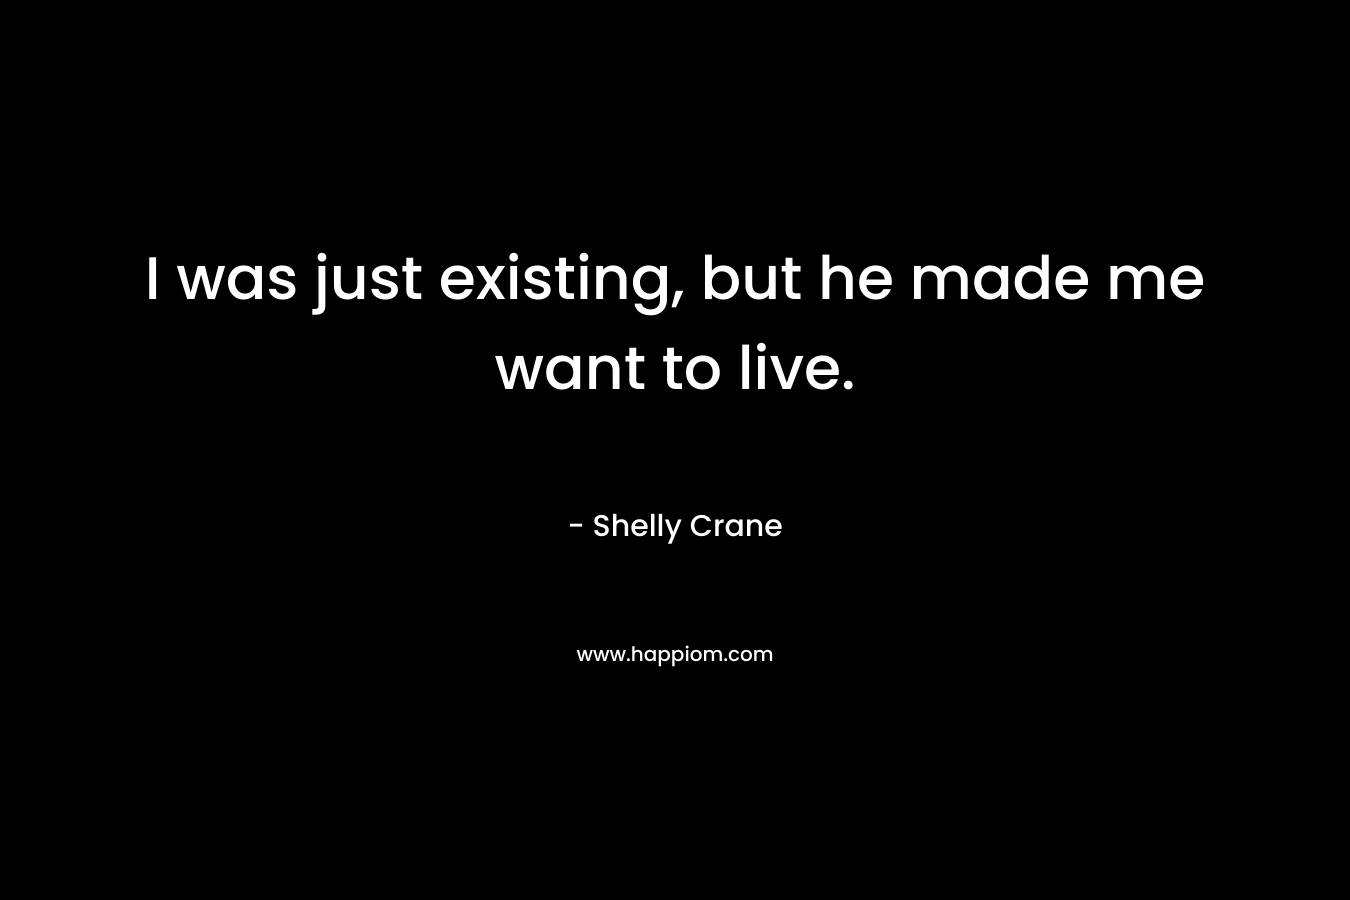 I was just existing, but he made me want to live. – Shelly Crane